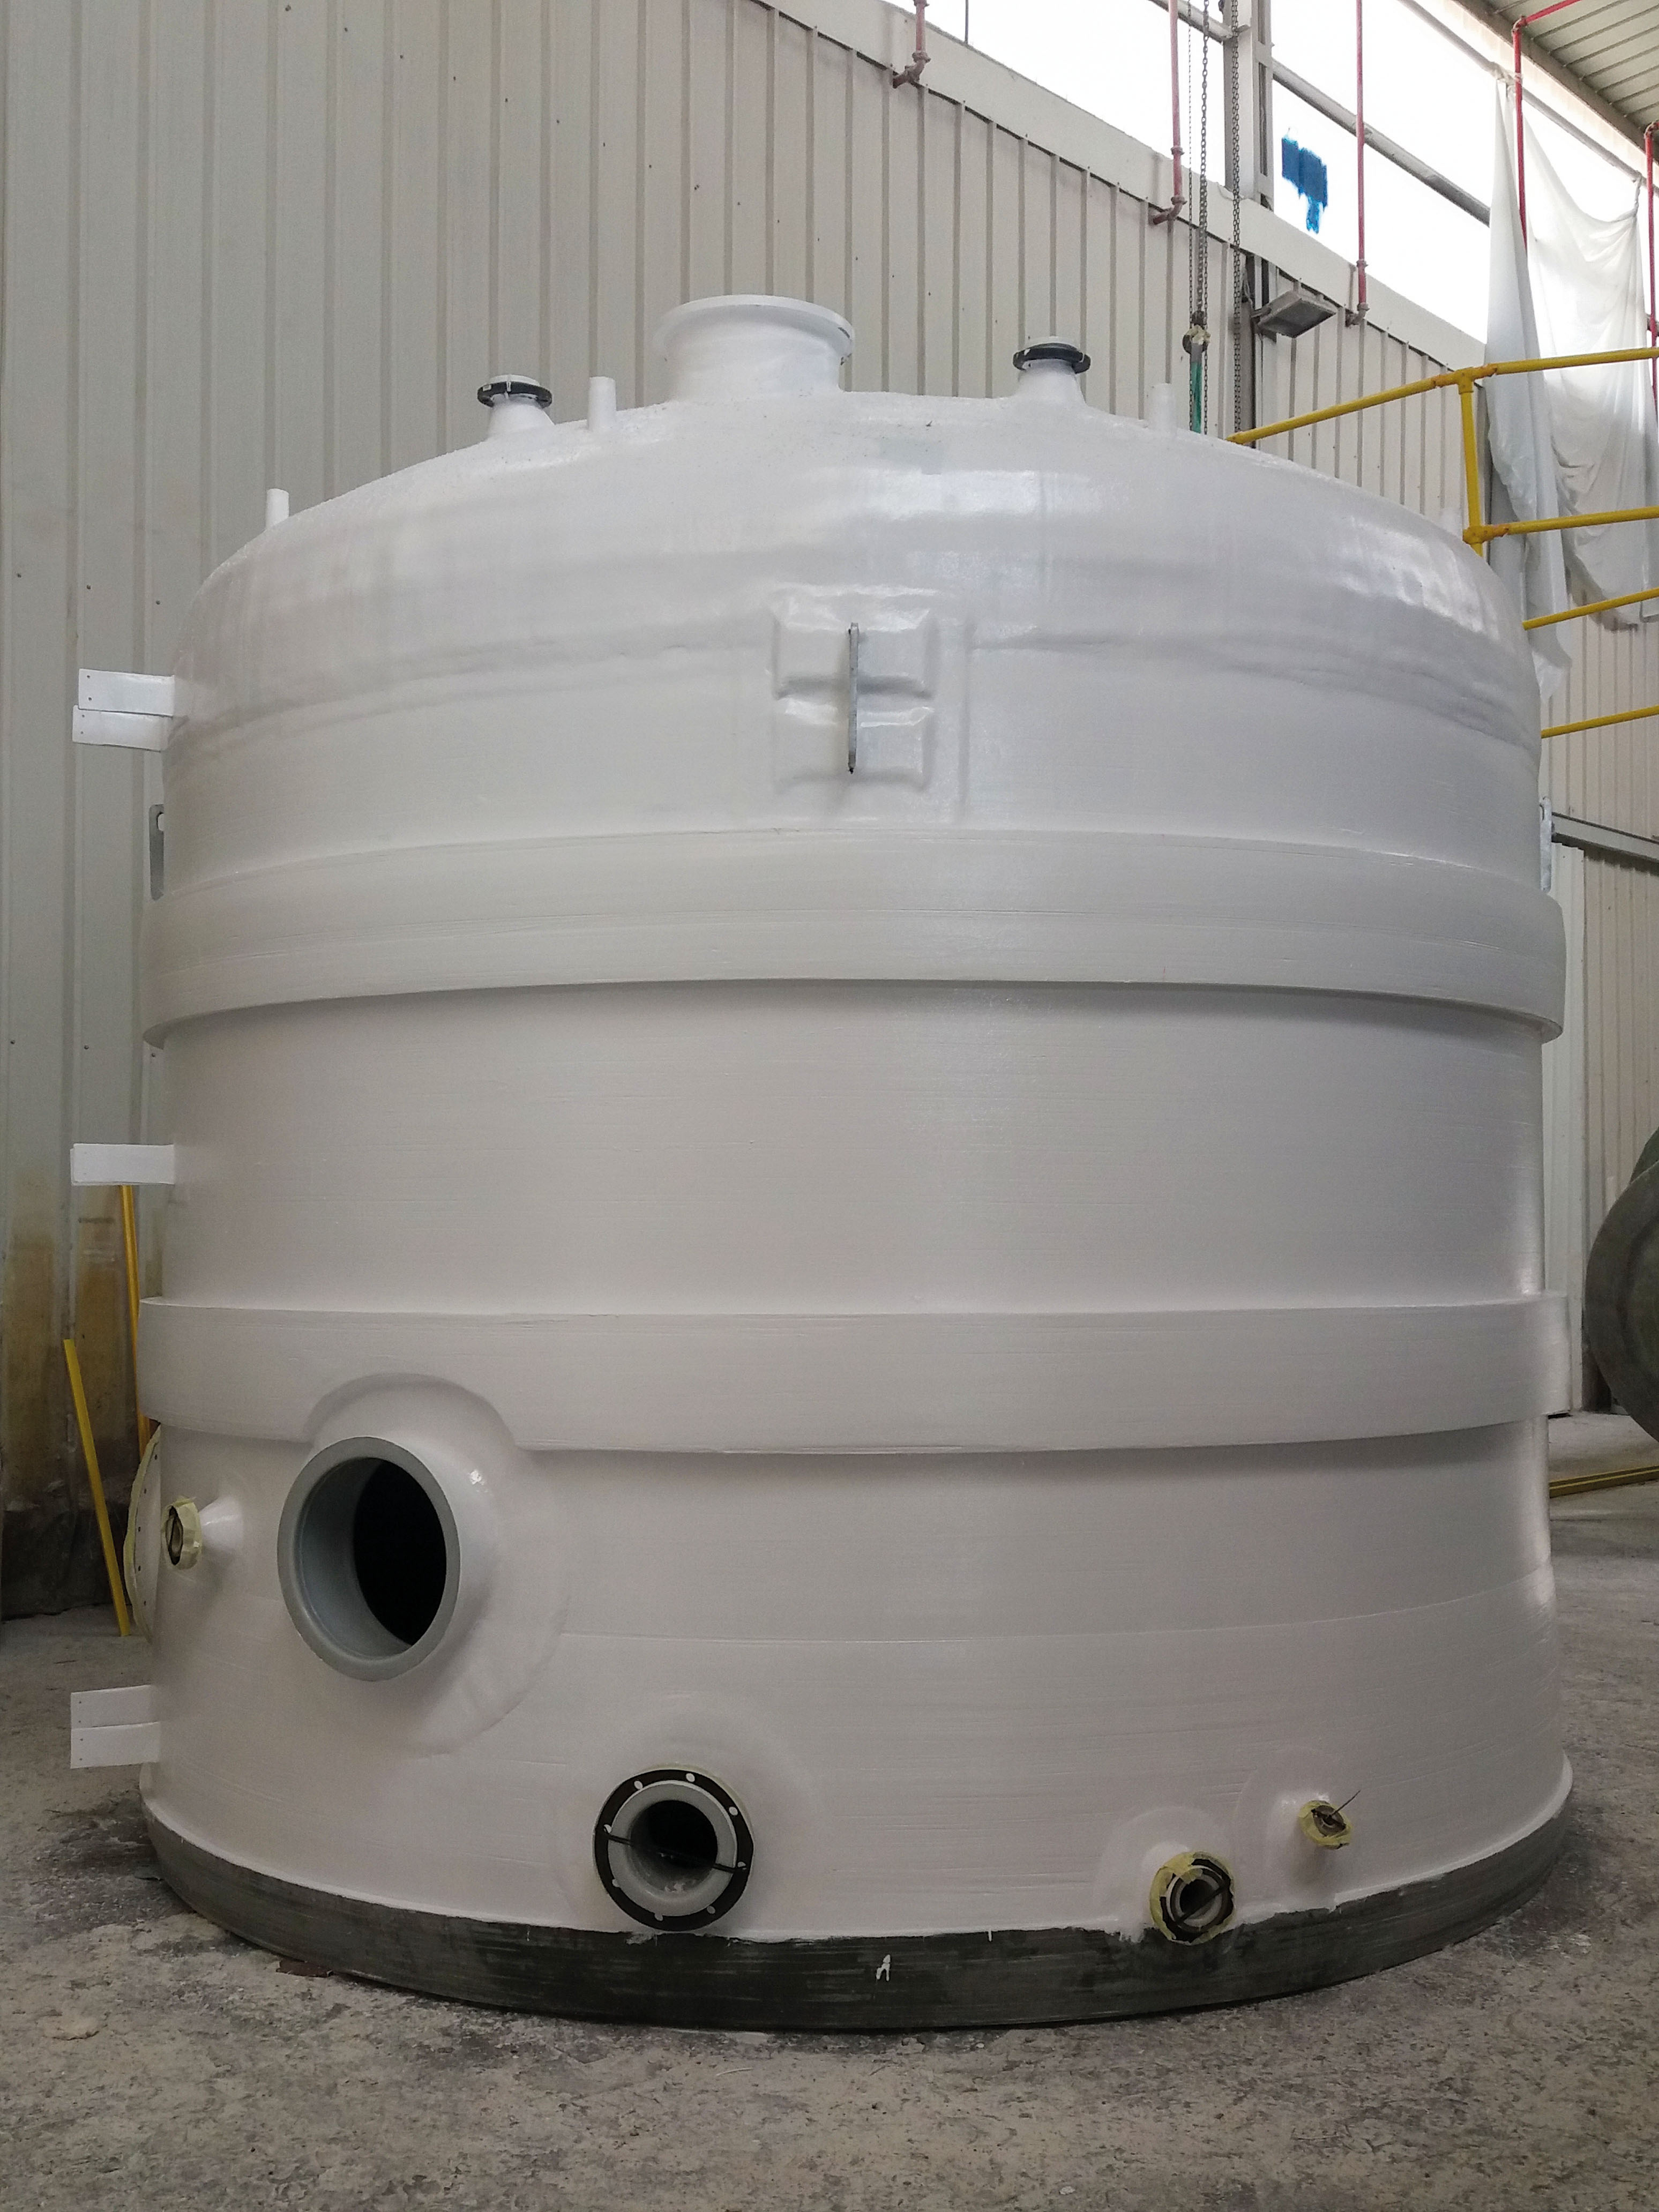 One of the storage tanks with Ø 4.000 mm